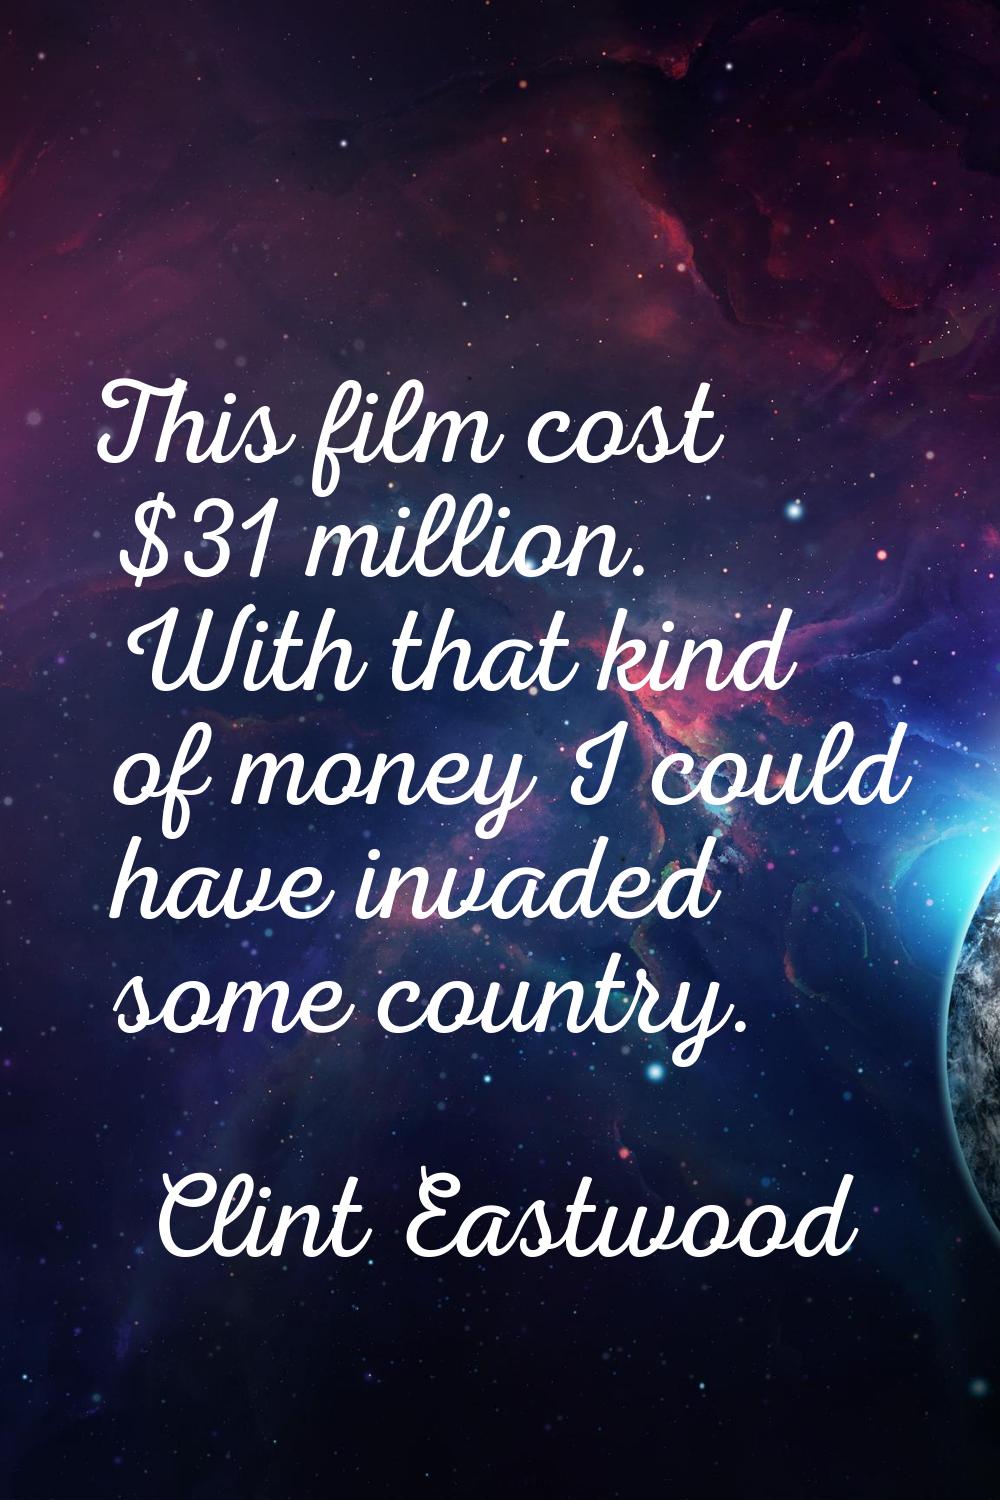 This film cost $31 million. With that kind of money I could have invaded some country.